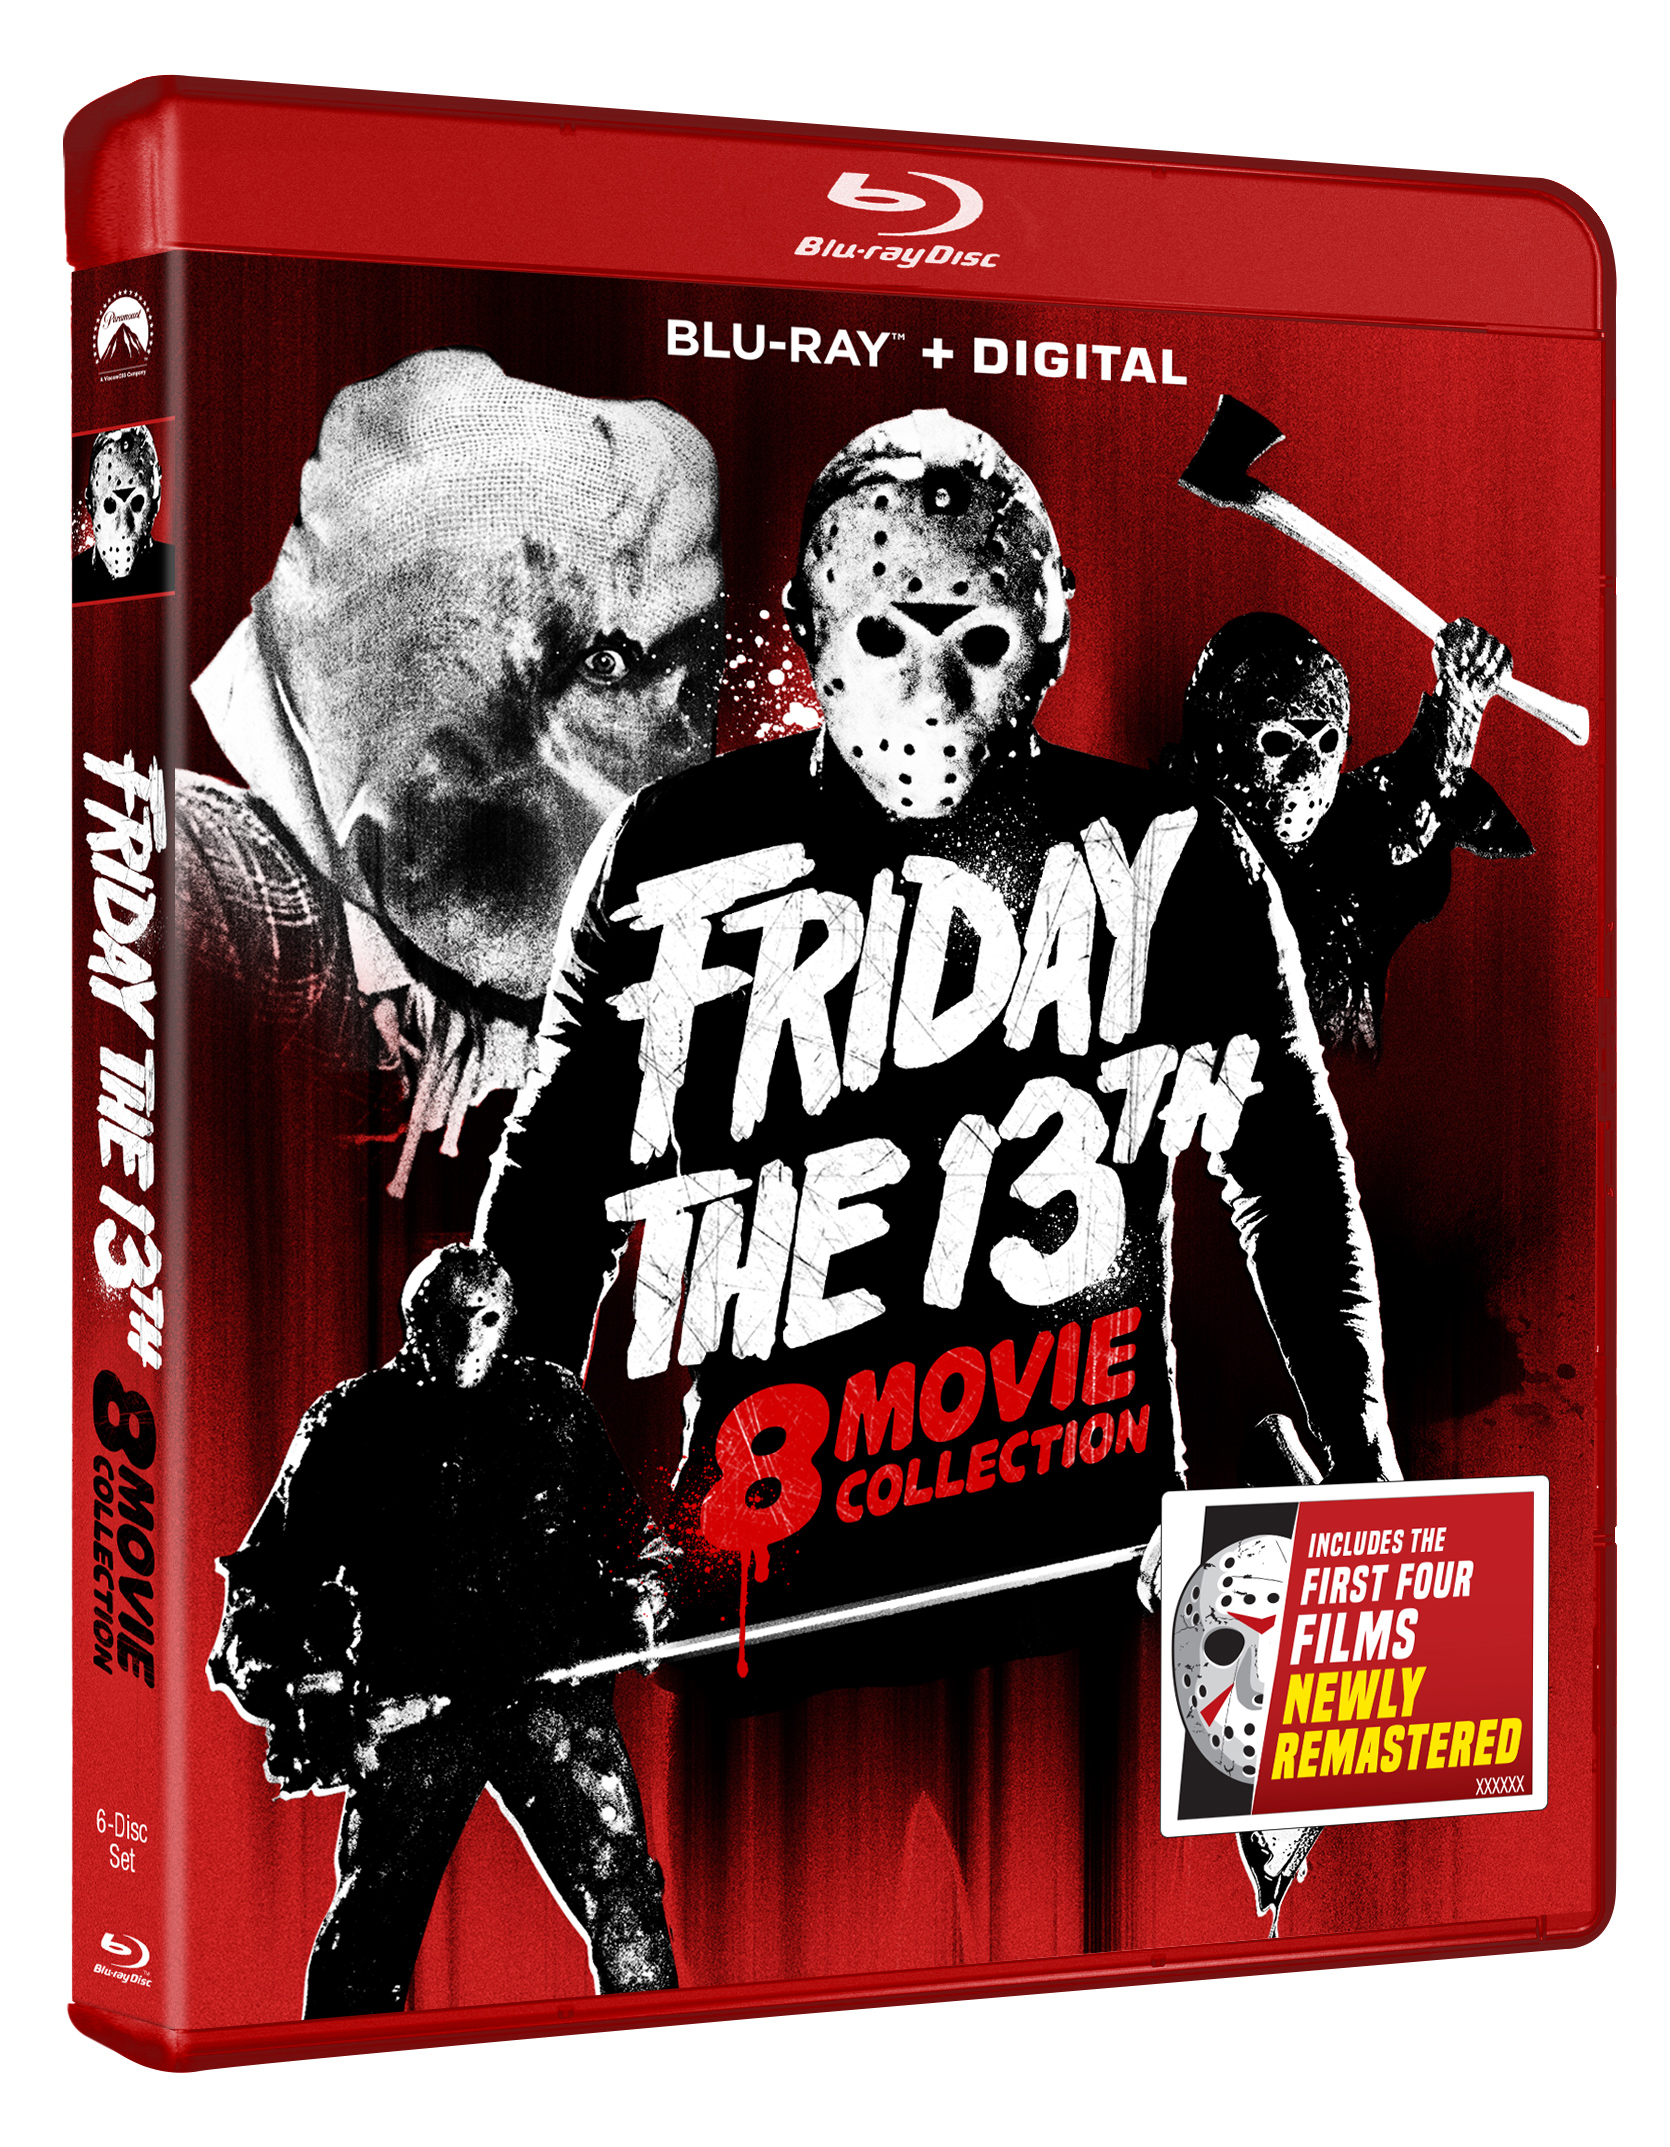 Best Buy: Friday the 13th: The Game Ultimate Slasher Edition